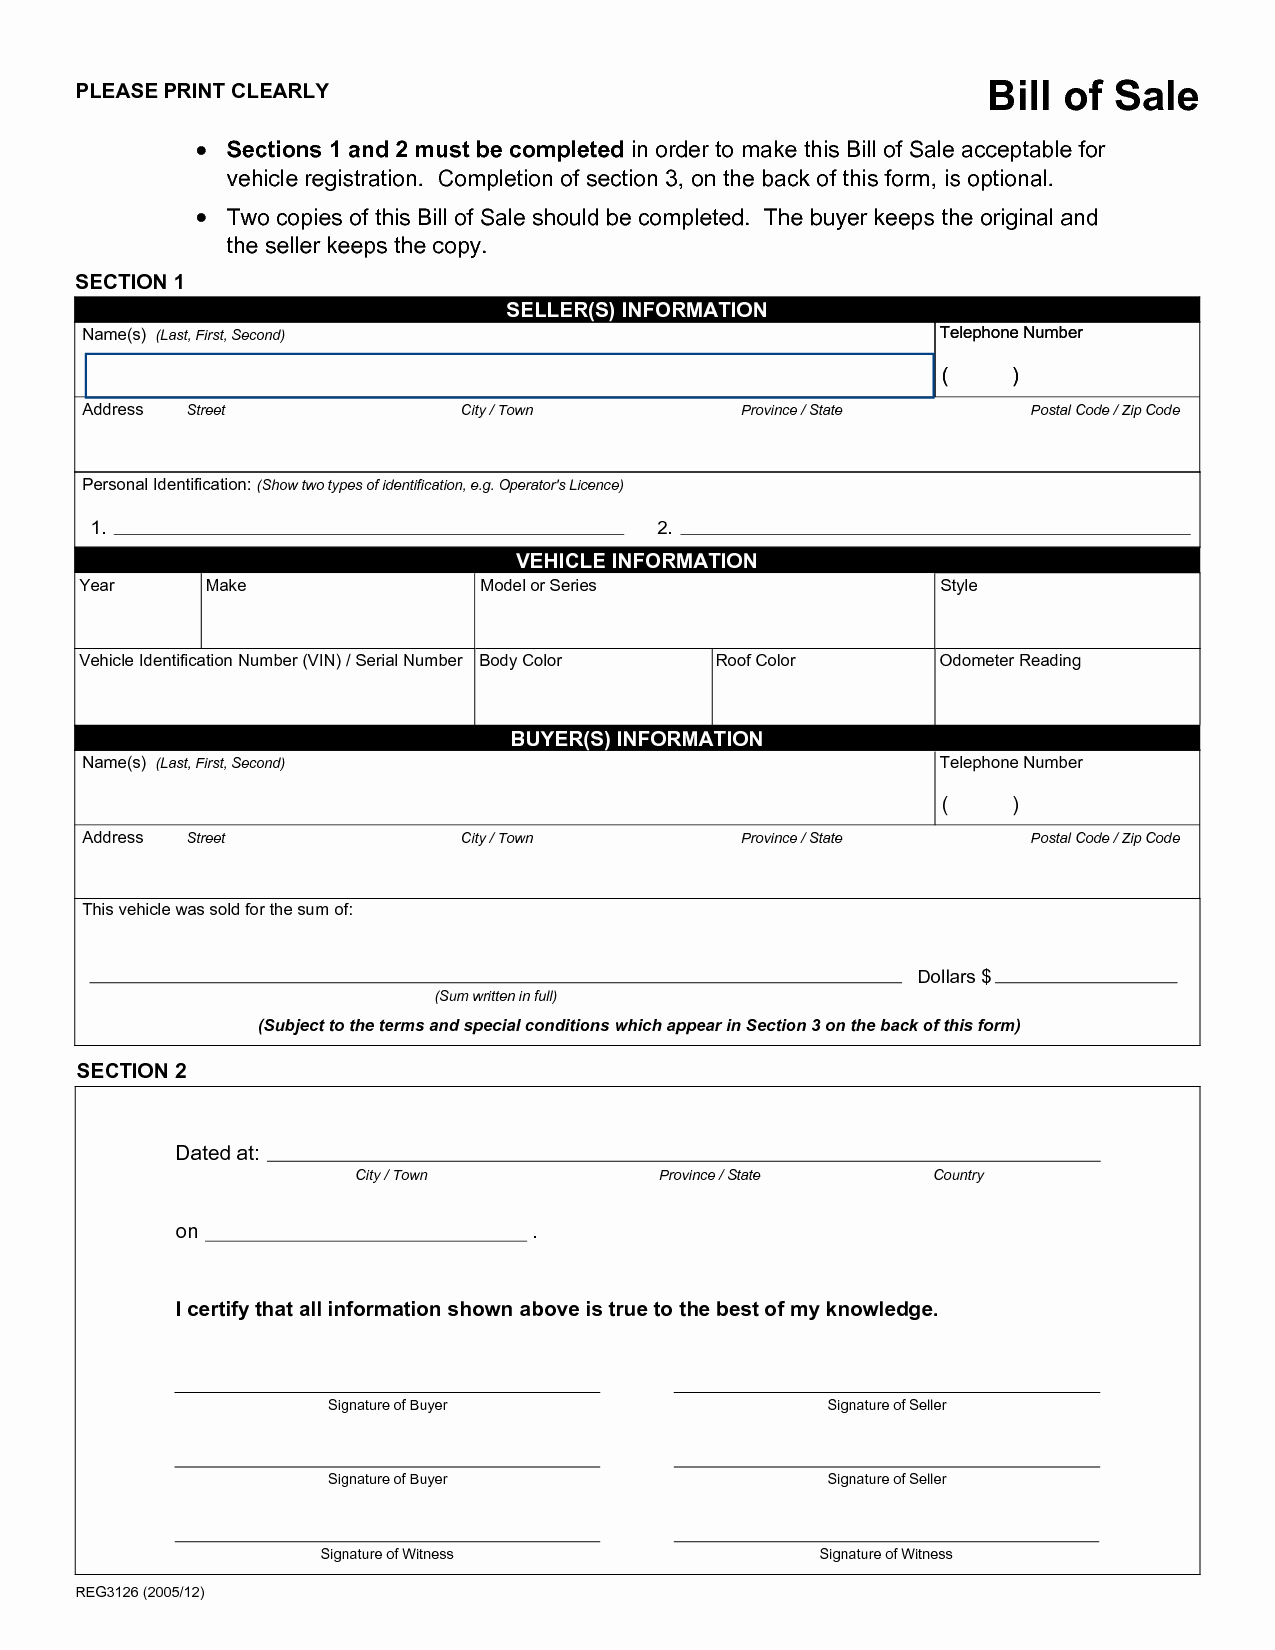 Ga Auto Bill Of Sale Best Of Free Printable Auto Bill Of Sale form Generic